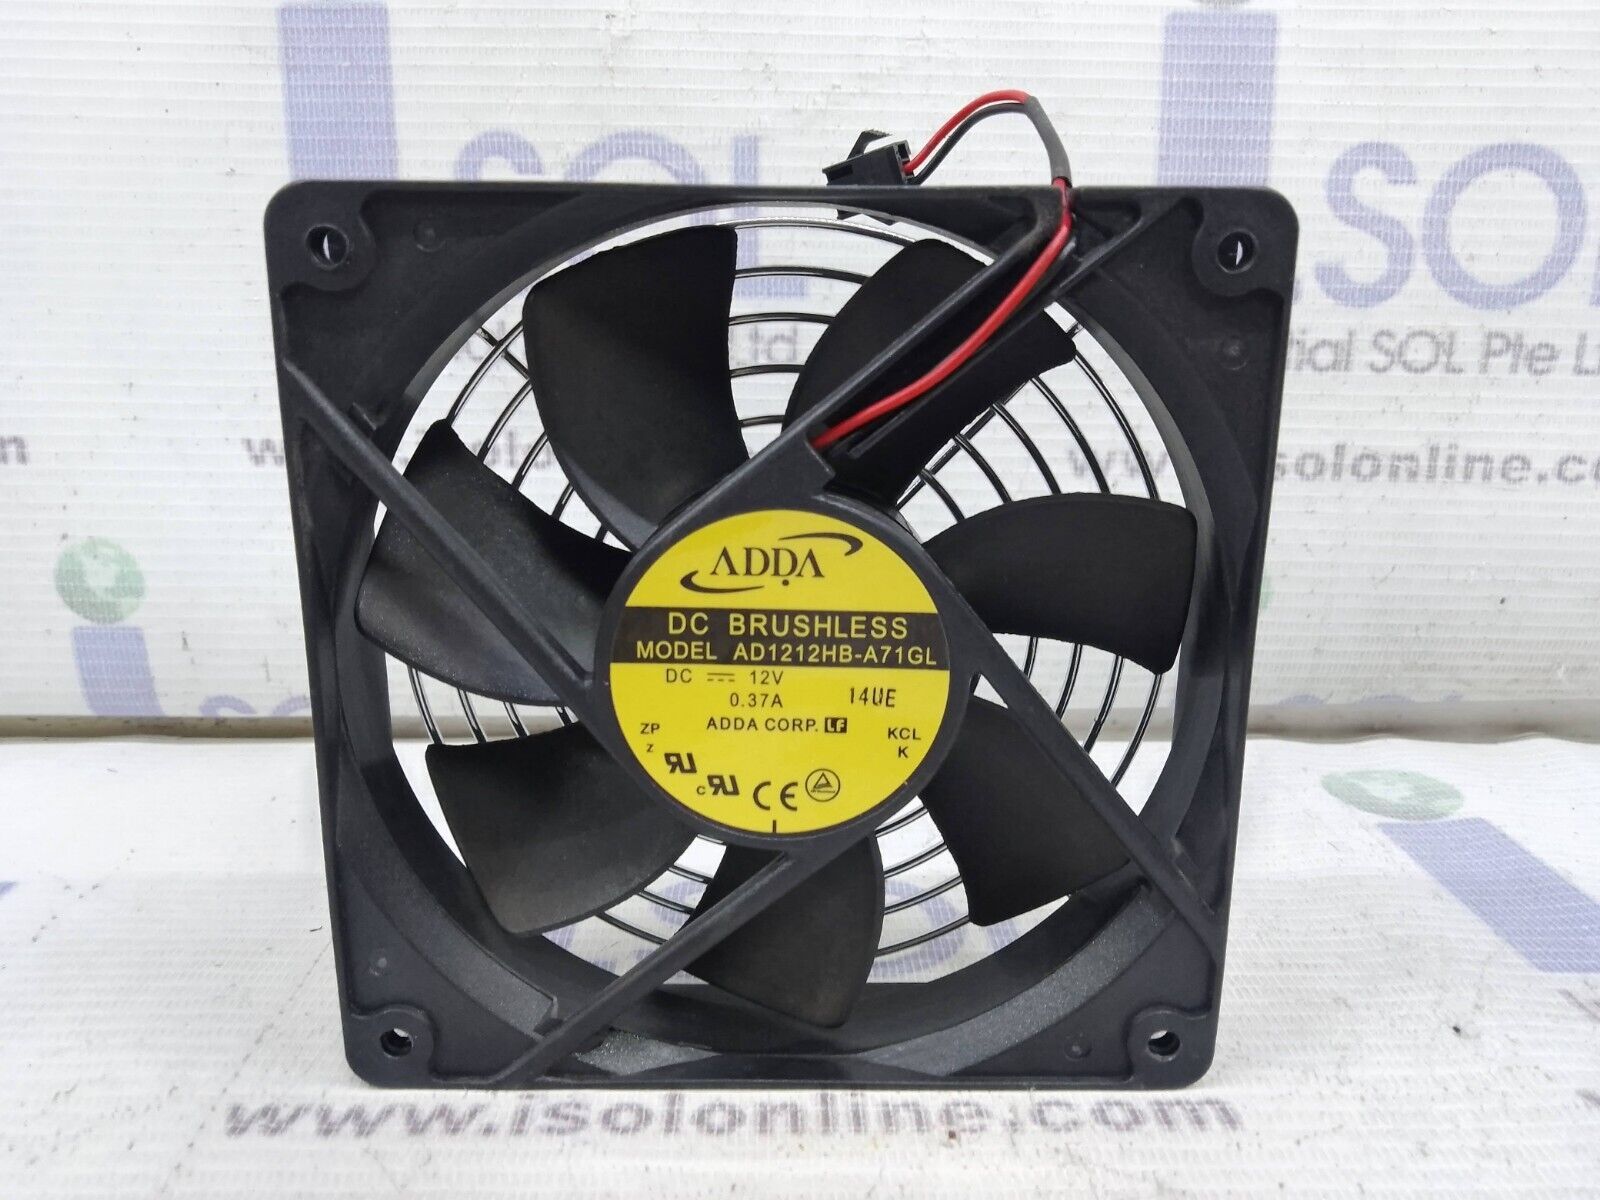 Primary image for ADDA AD1212HB-A71GL DC Brushless Fan 12V 0.37A